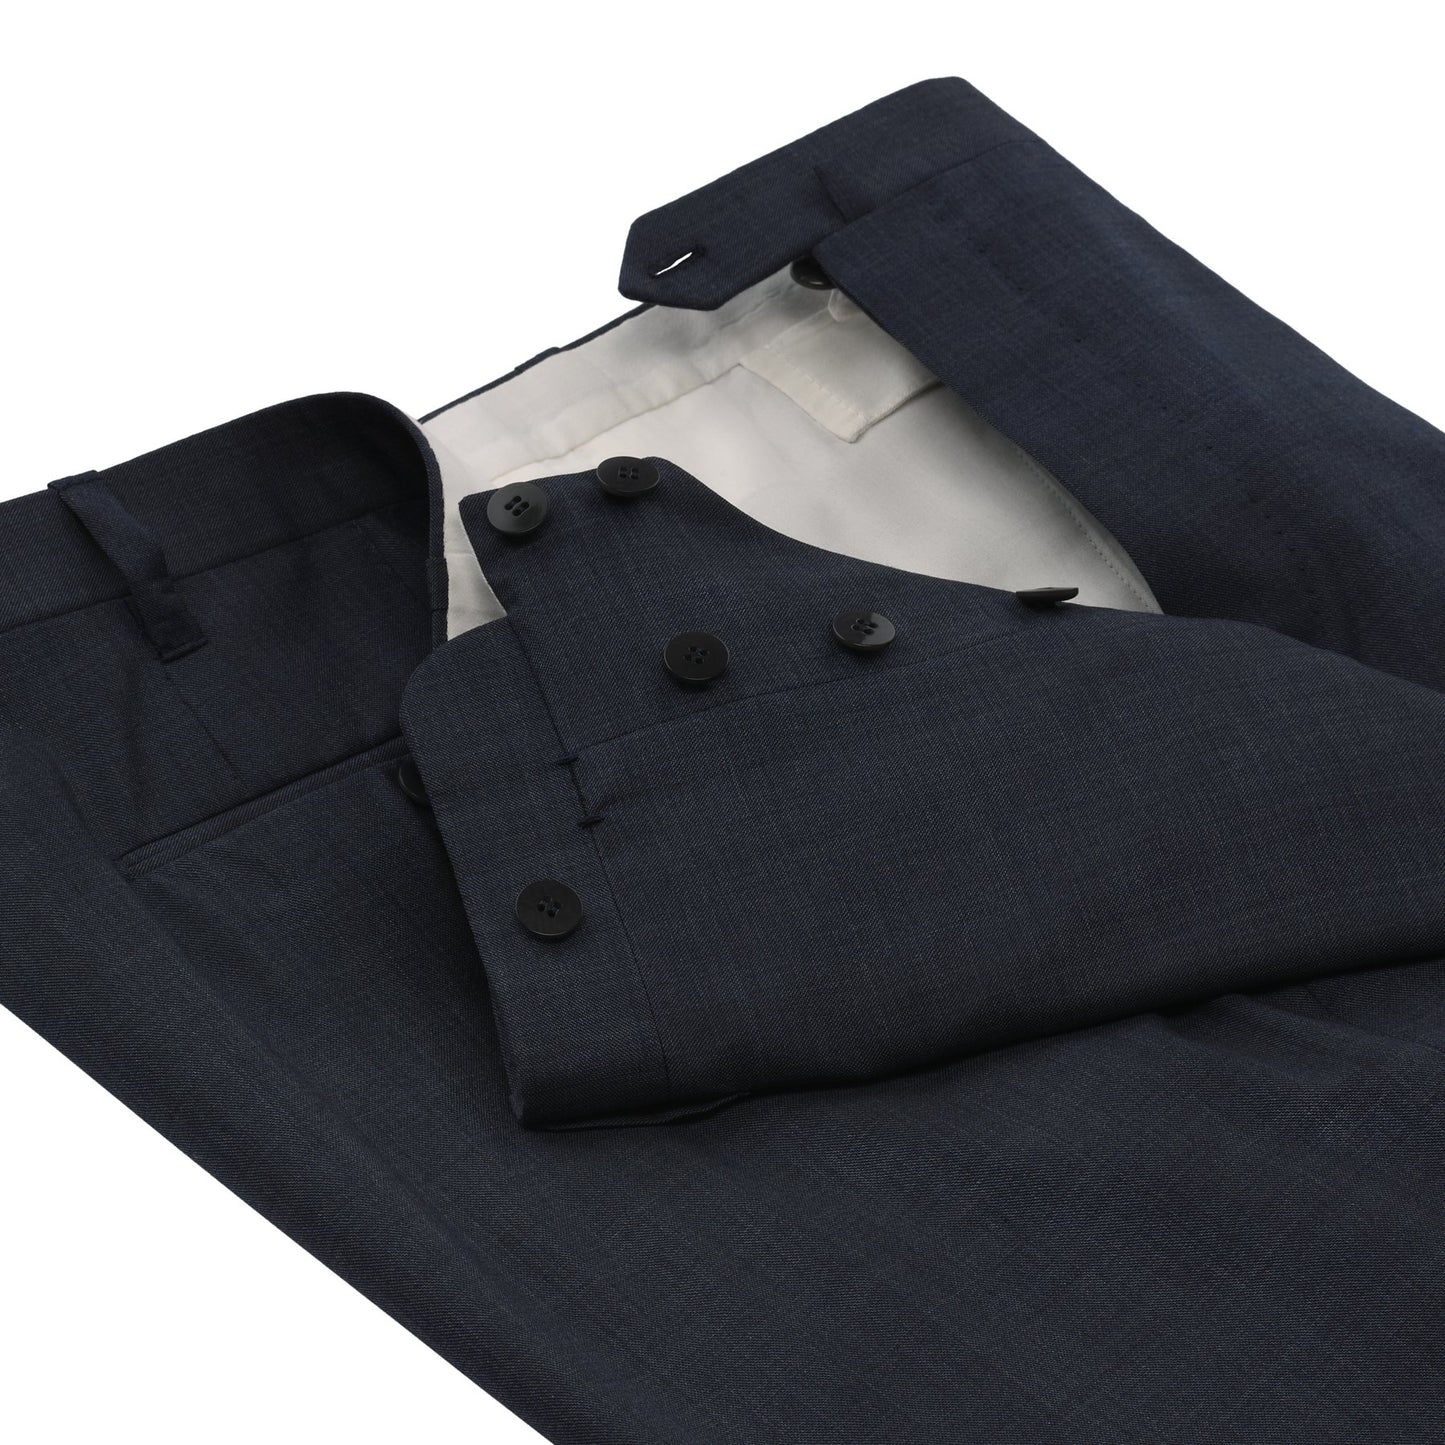 Cesare Attolini Single-Breasted Wool and Silk-Blend Suit in Blue - SARTALE